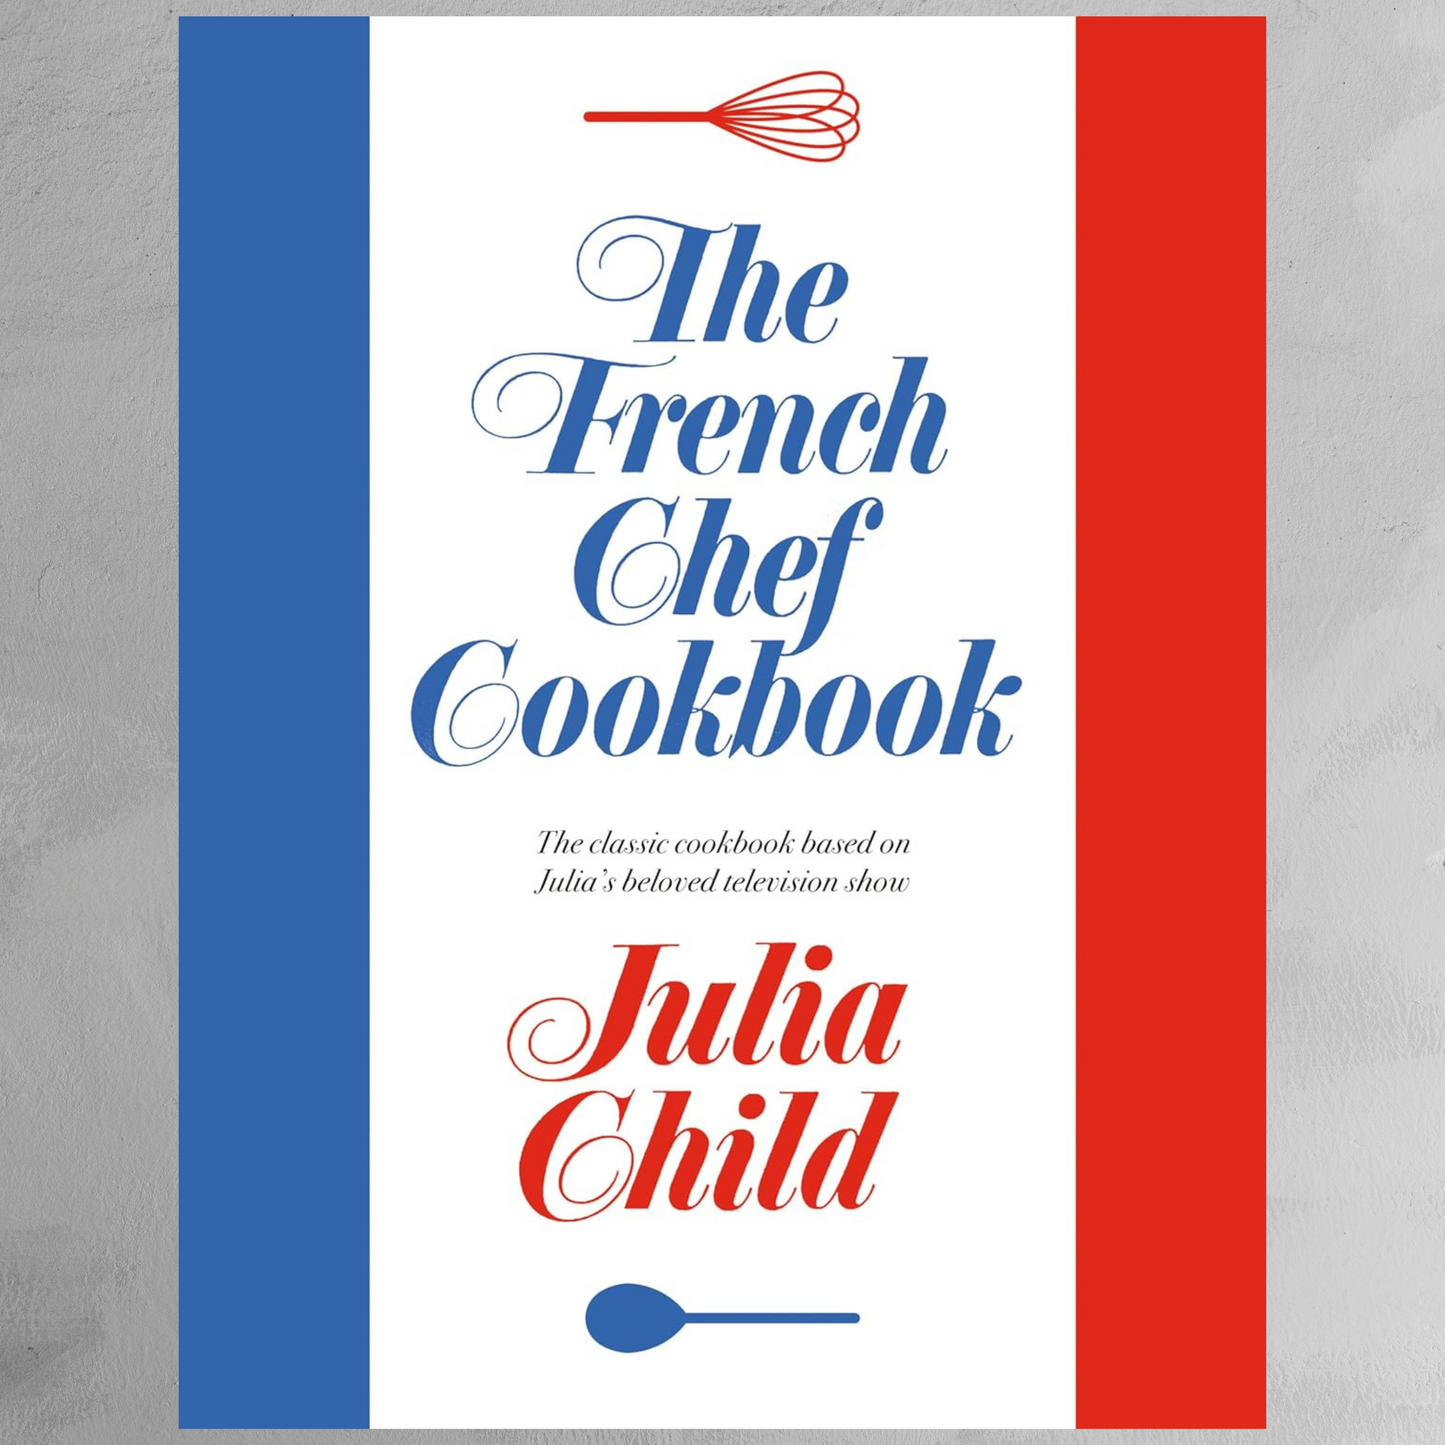 Book - The French Chef Cookbook